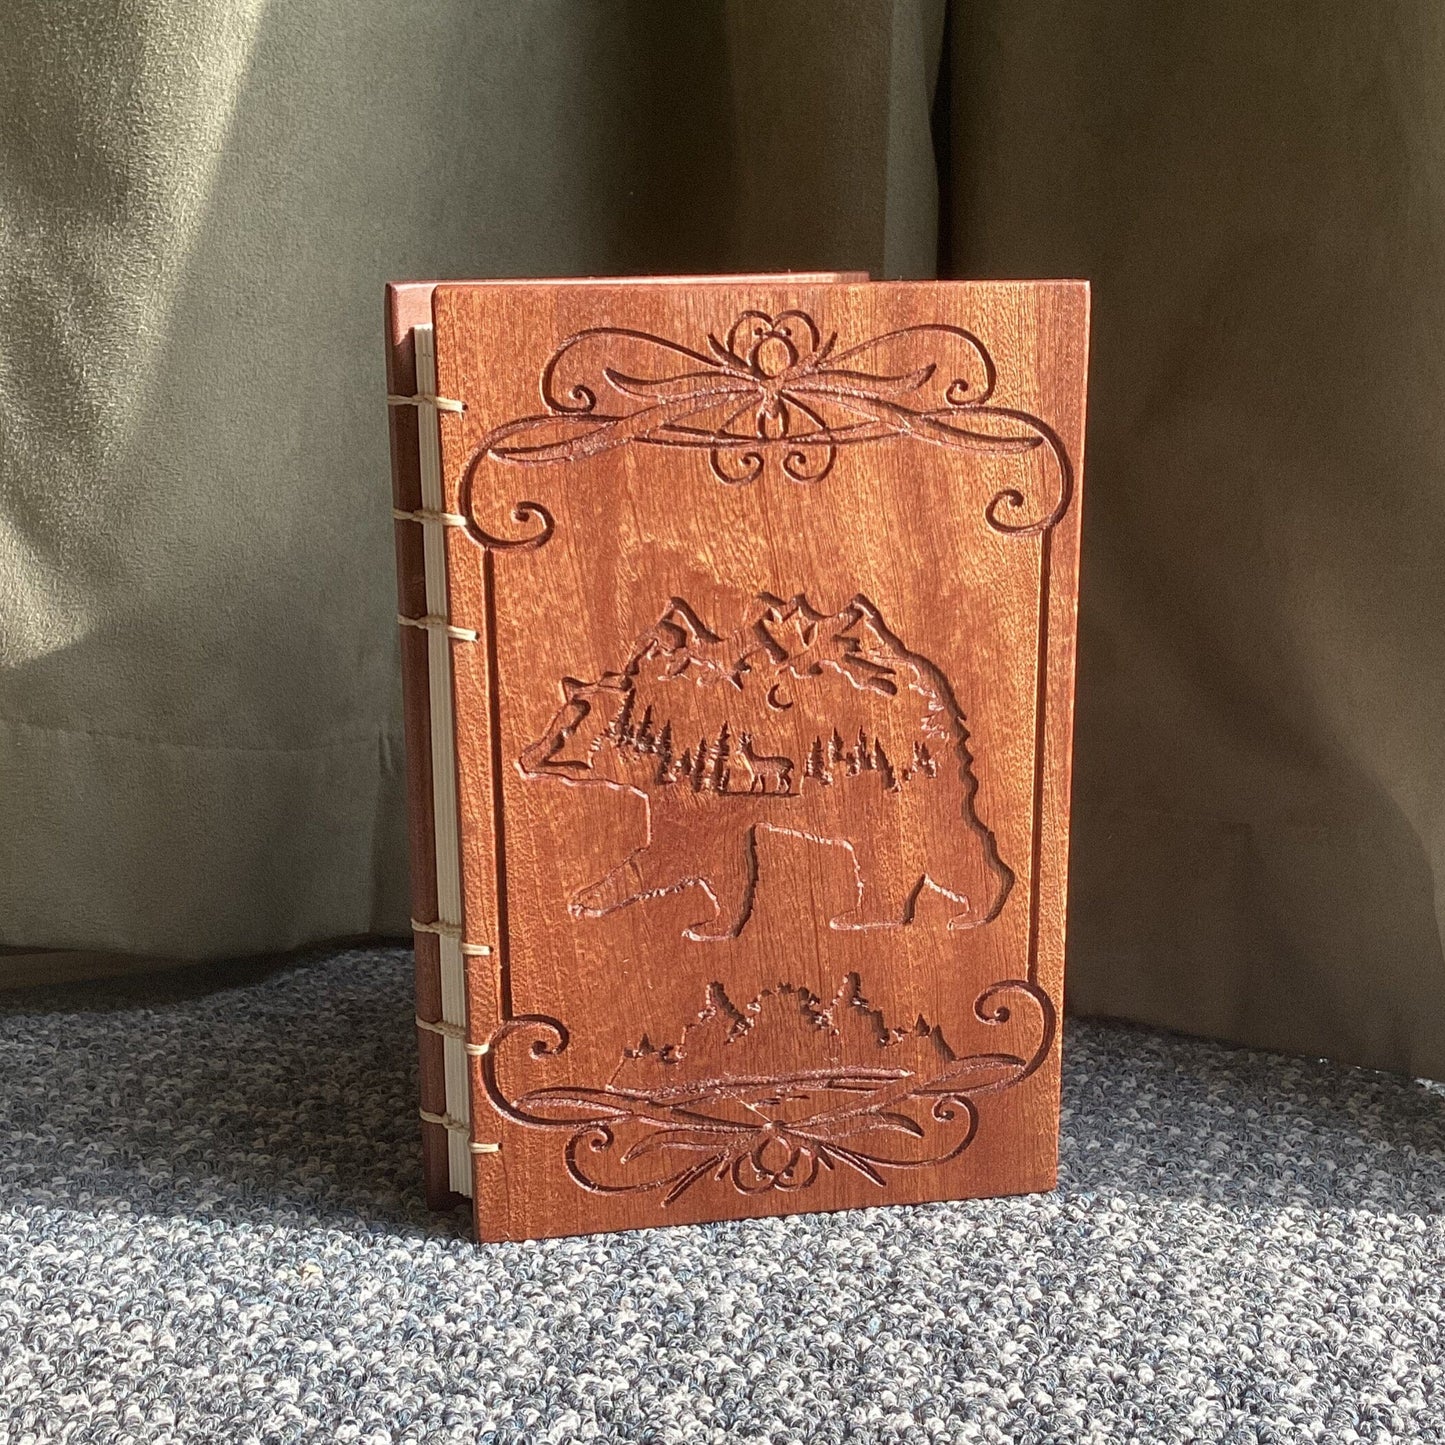 Engraved Personalized Journal, Bear, Canadian, Christmas Gift, Birthday gift, Sapele (Mahogany), Coptic Stitched Custom Carved Journals, Guest Books, Journals and Notebooks 8th Line Creations 